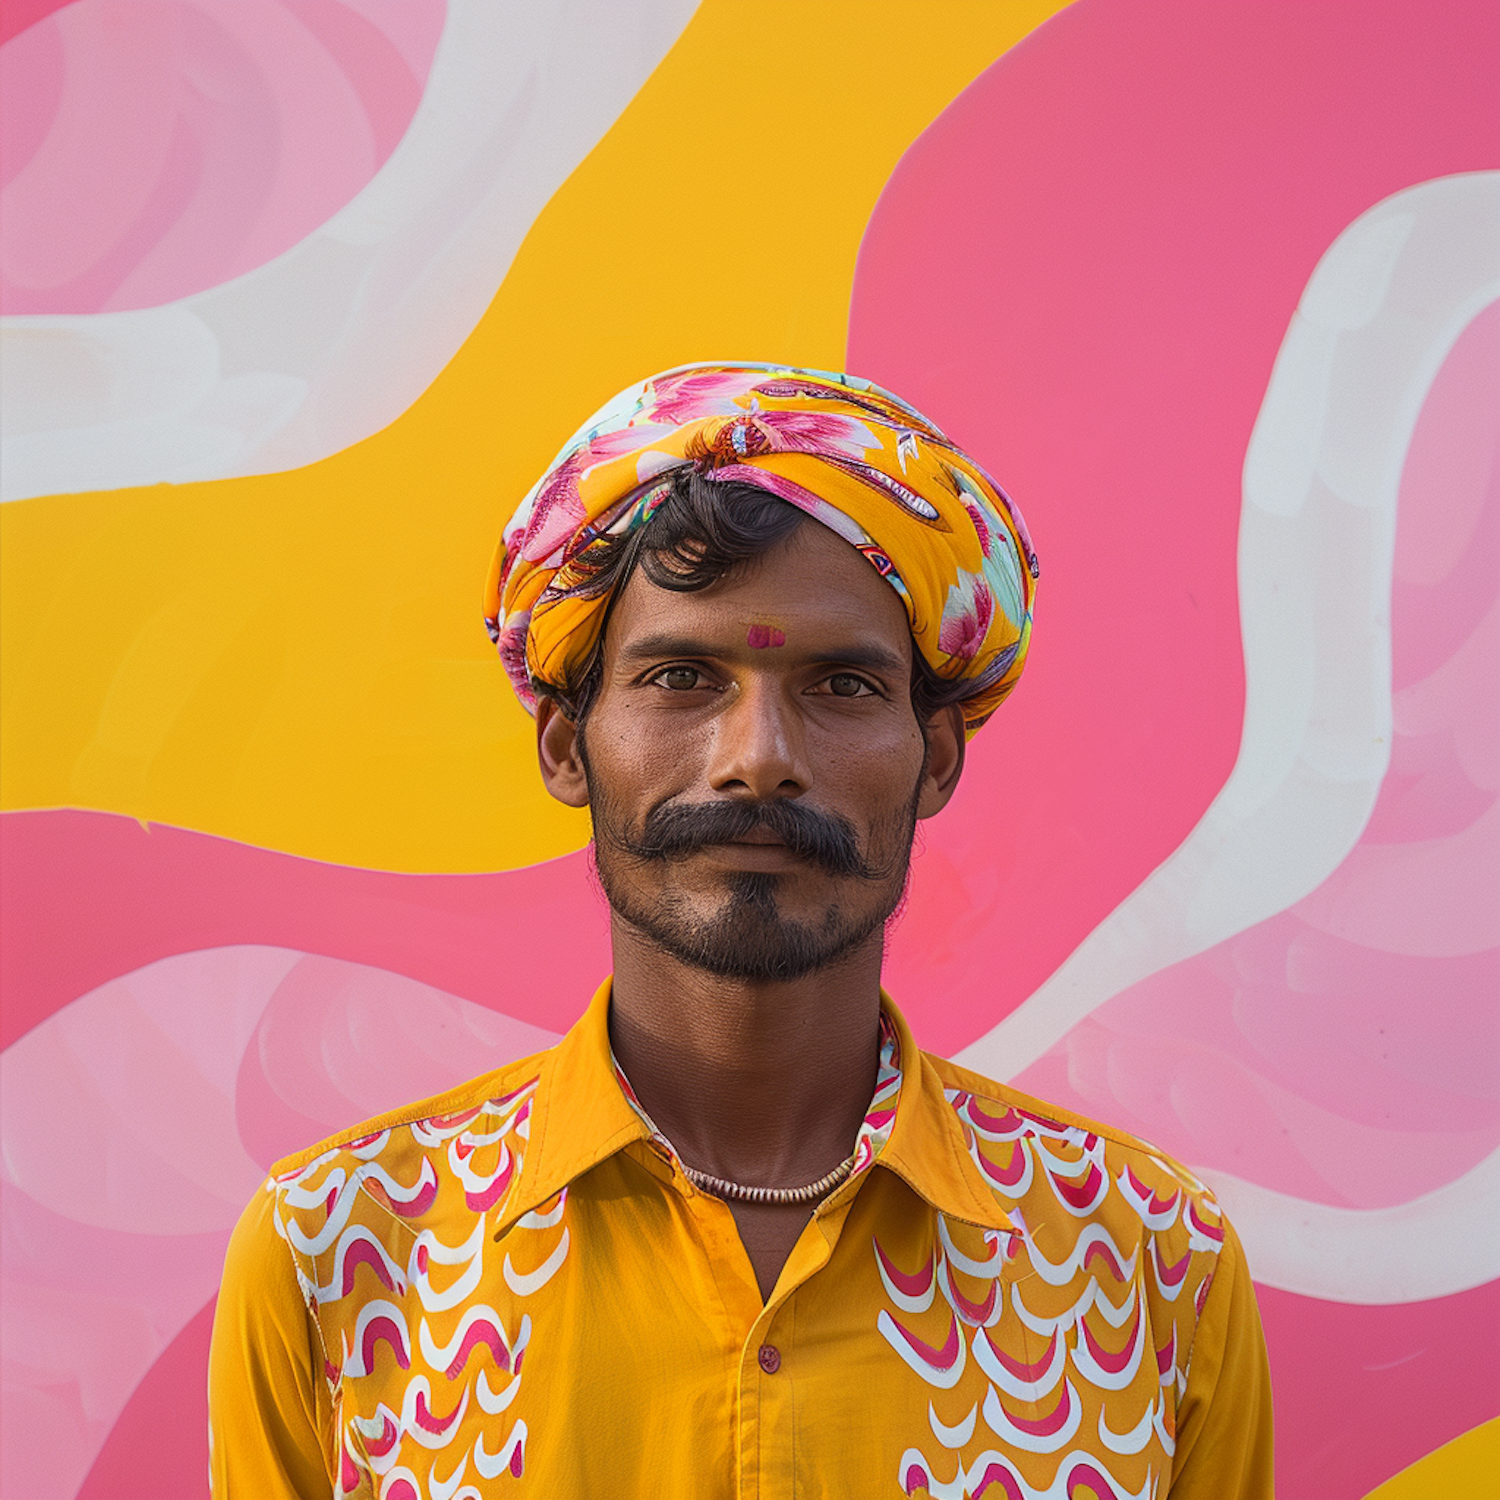 South Asian Man with Traditional Attire